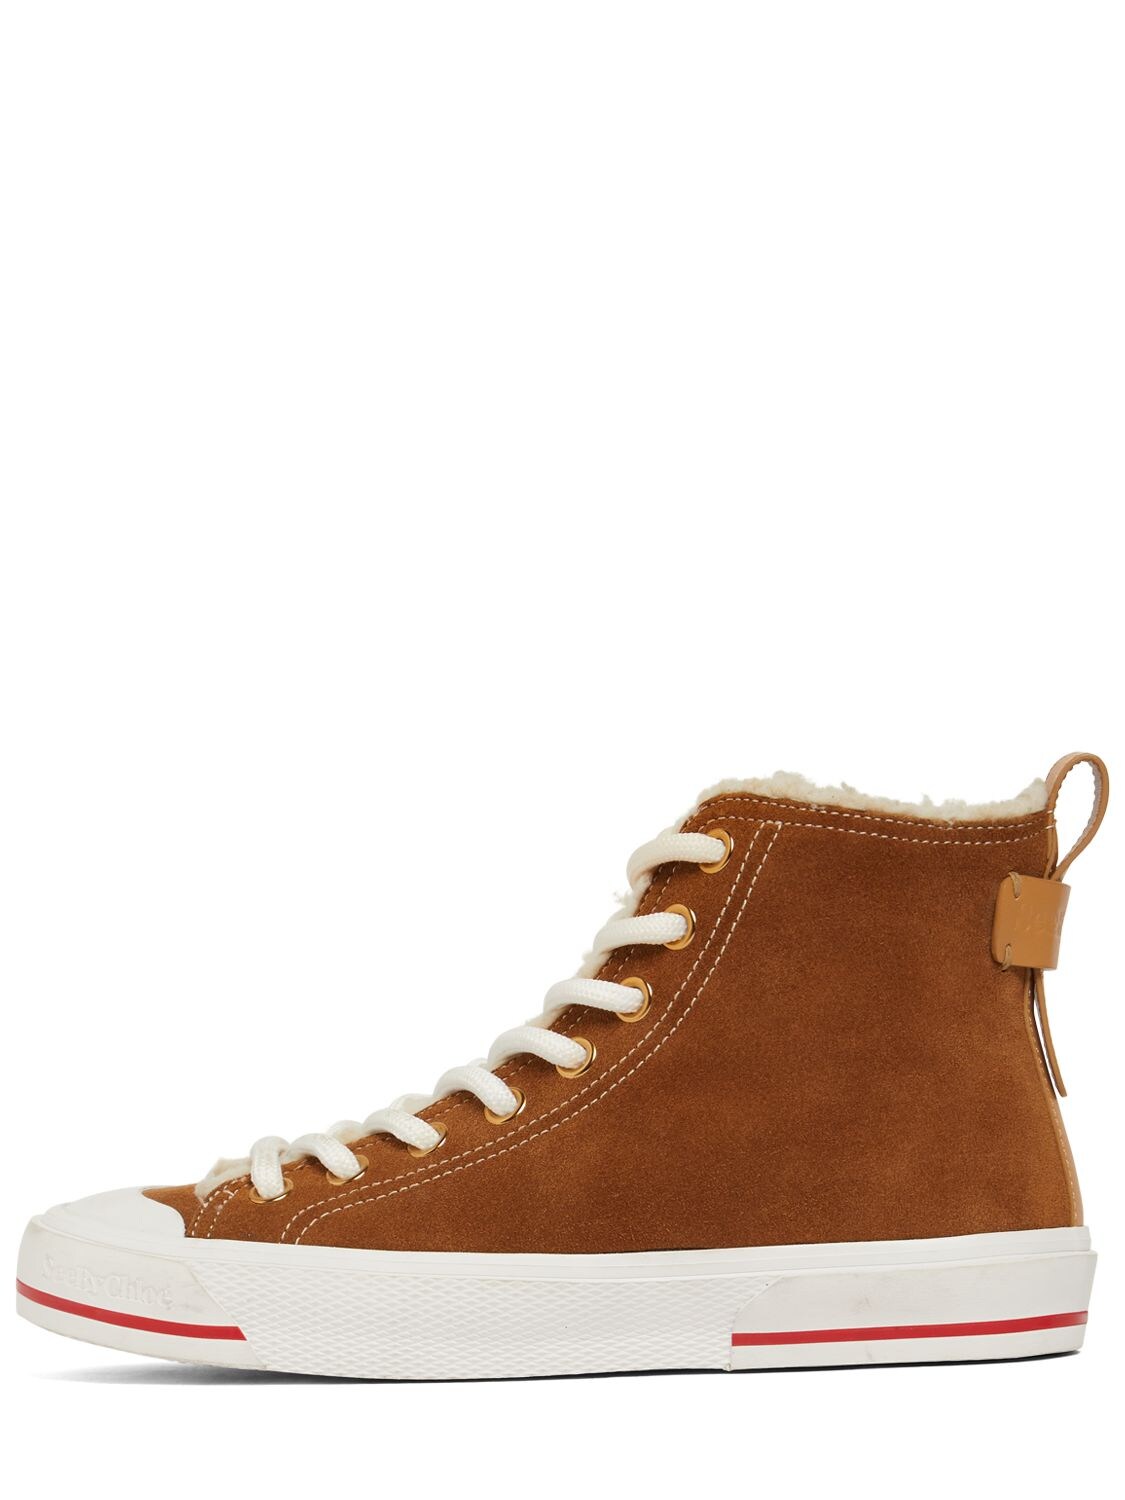 See By Chloé 20mm Aryana Shearling High Top Sneakers In Tan | ModeSens